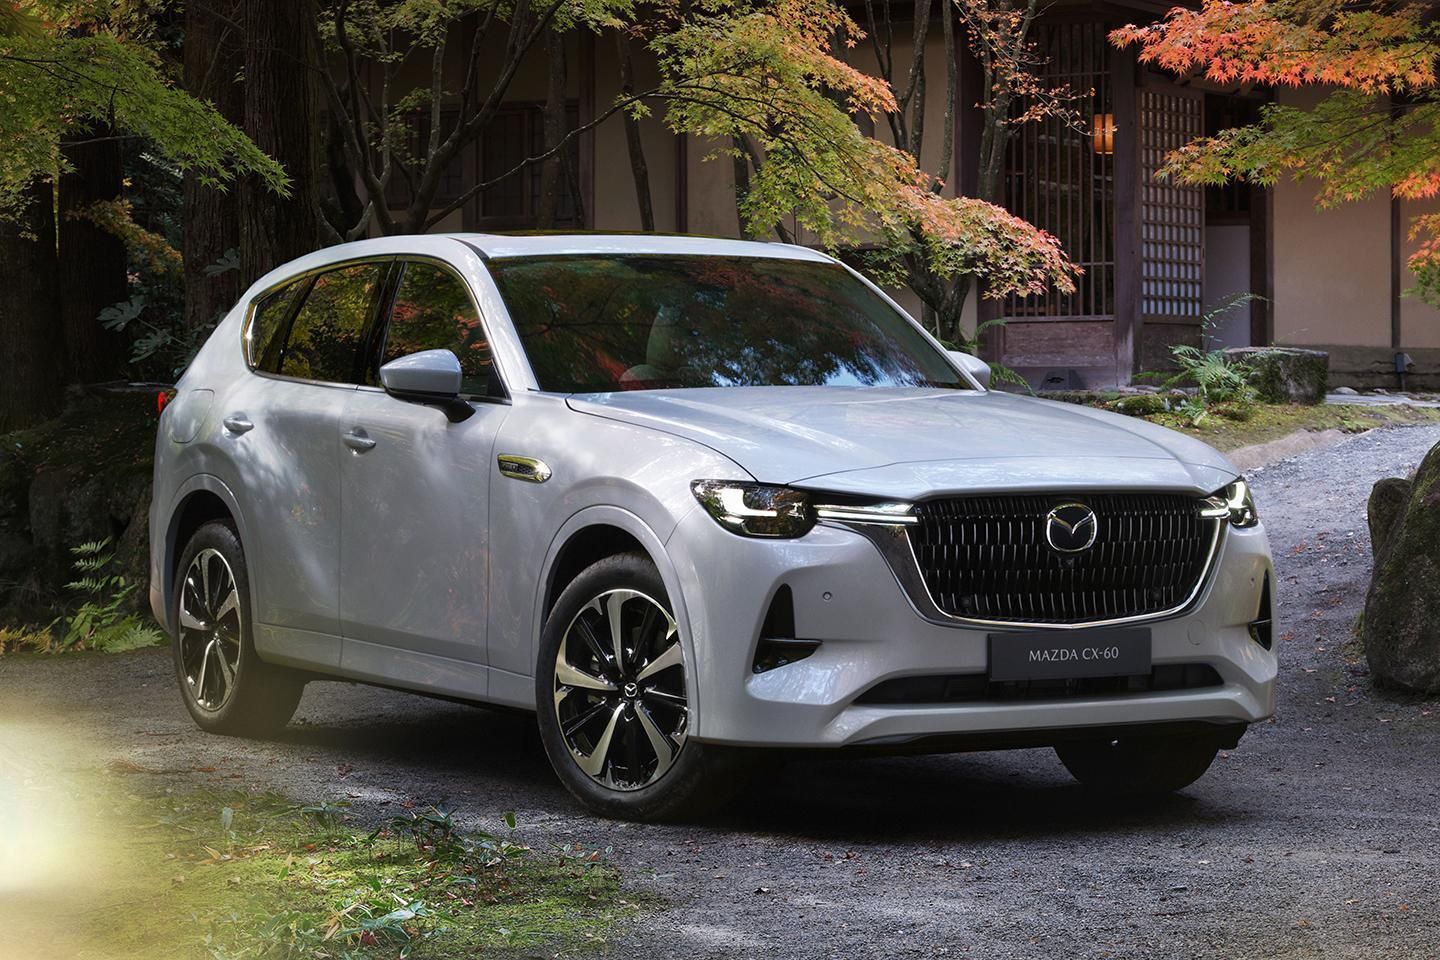 However you describe it, the new Mazda CX-60 is a magnificent car